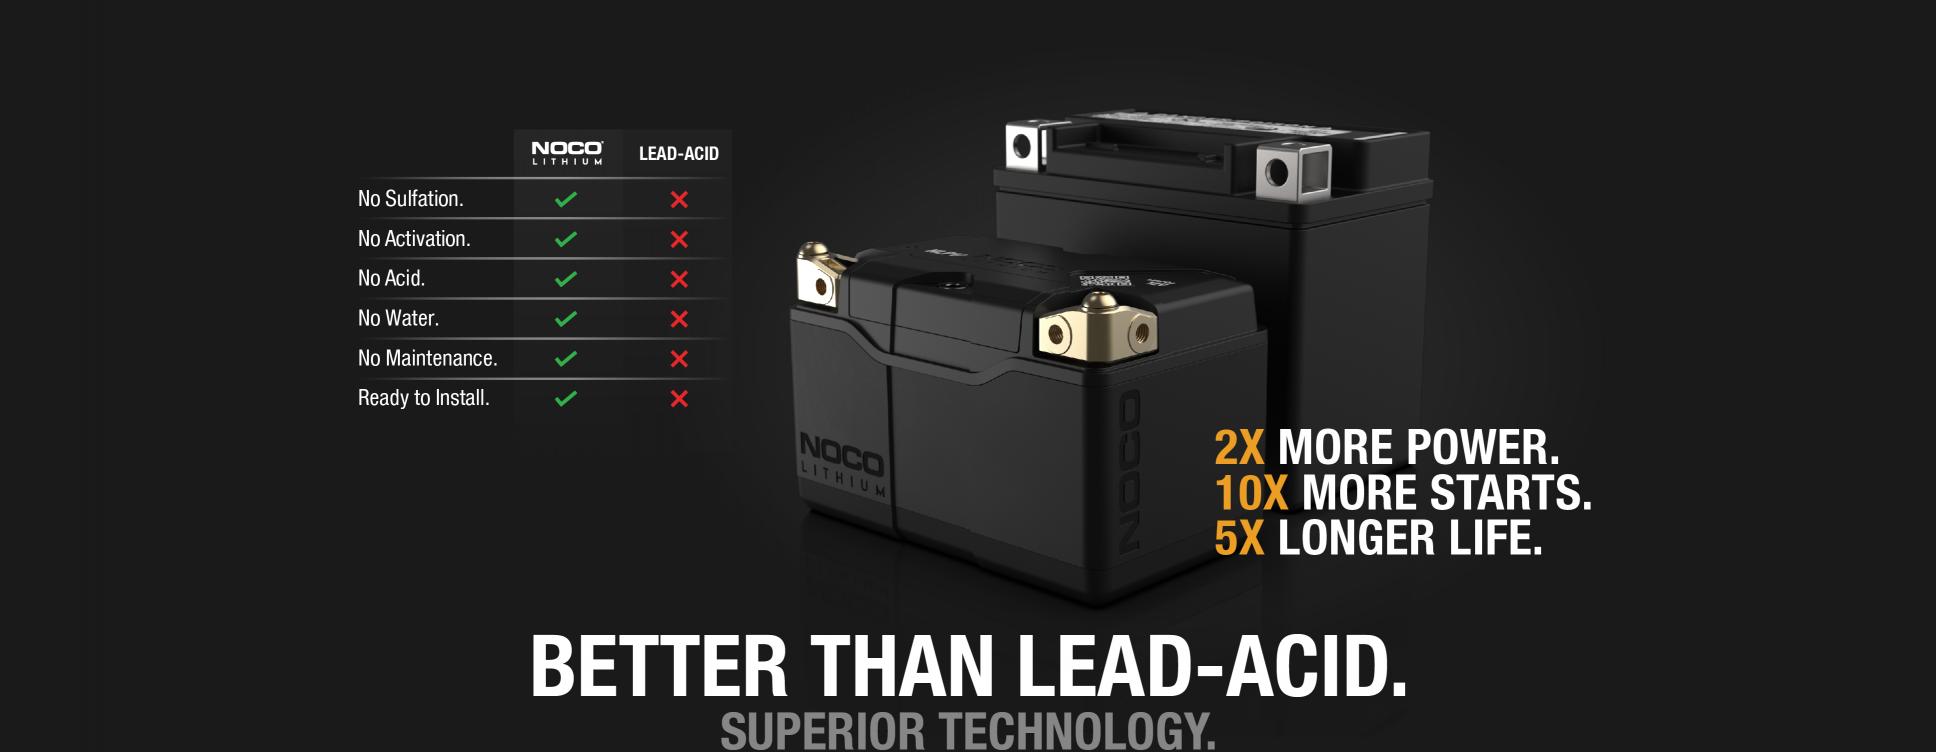 Noco NLP14 is the most highly-designed and engineered lithium powersports battery series ever. It's better than lead-acid powersports batteries in almost every way - no sulfation, no activation, no acid, no maintenance, and no water needed.